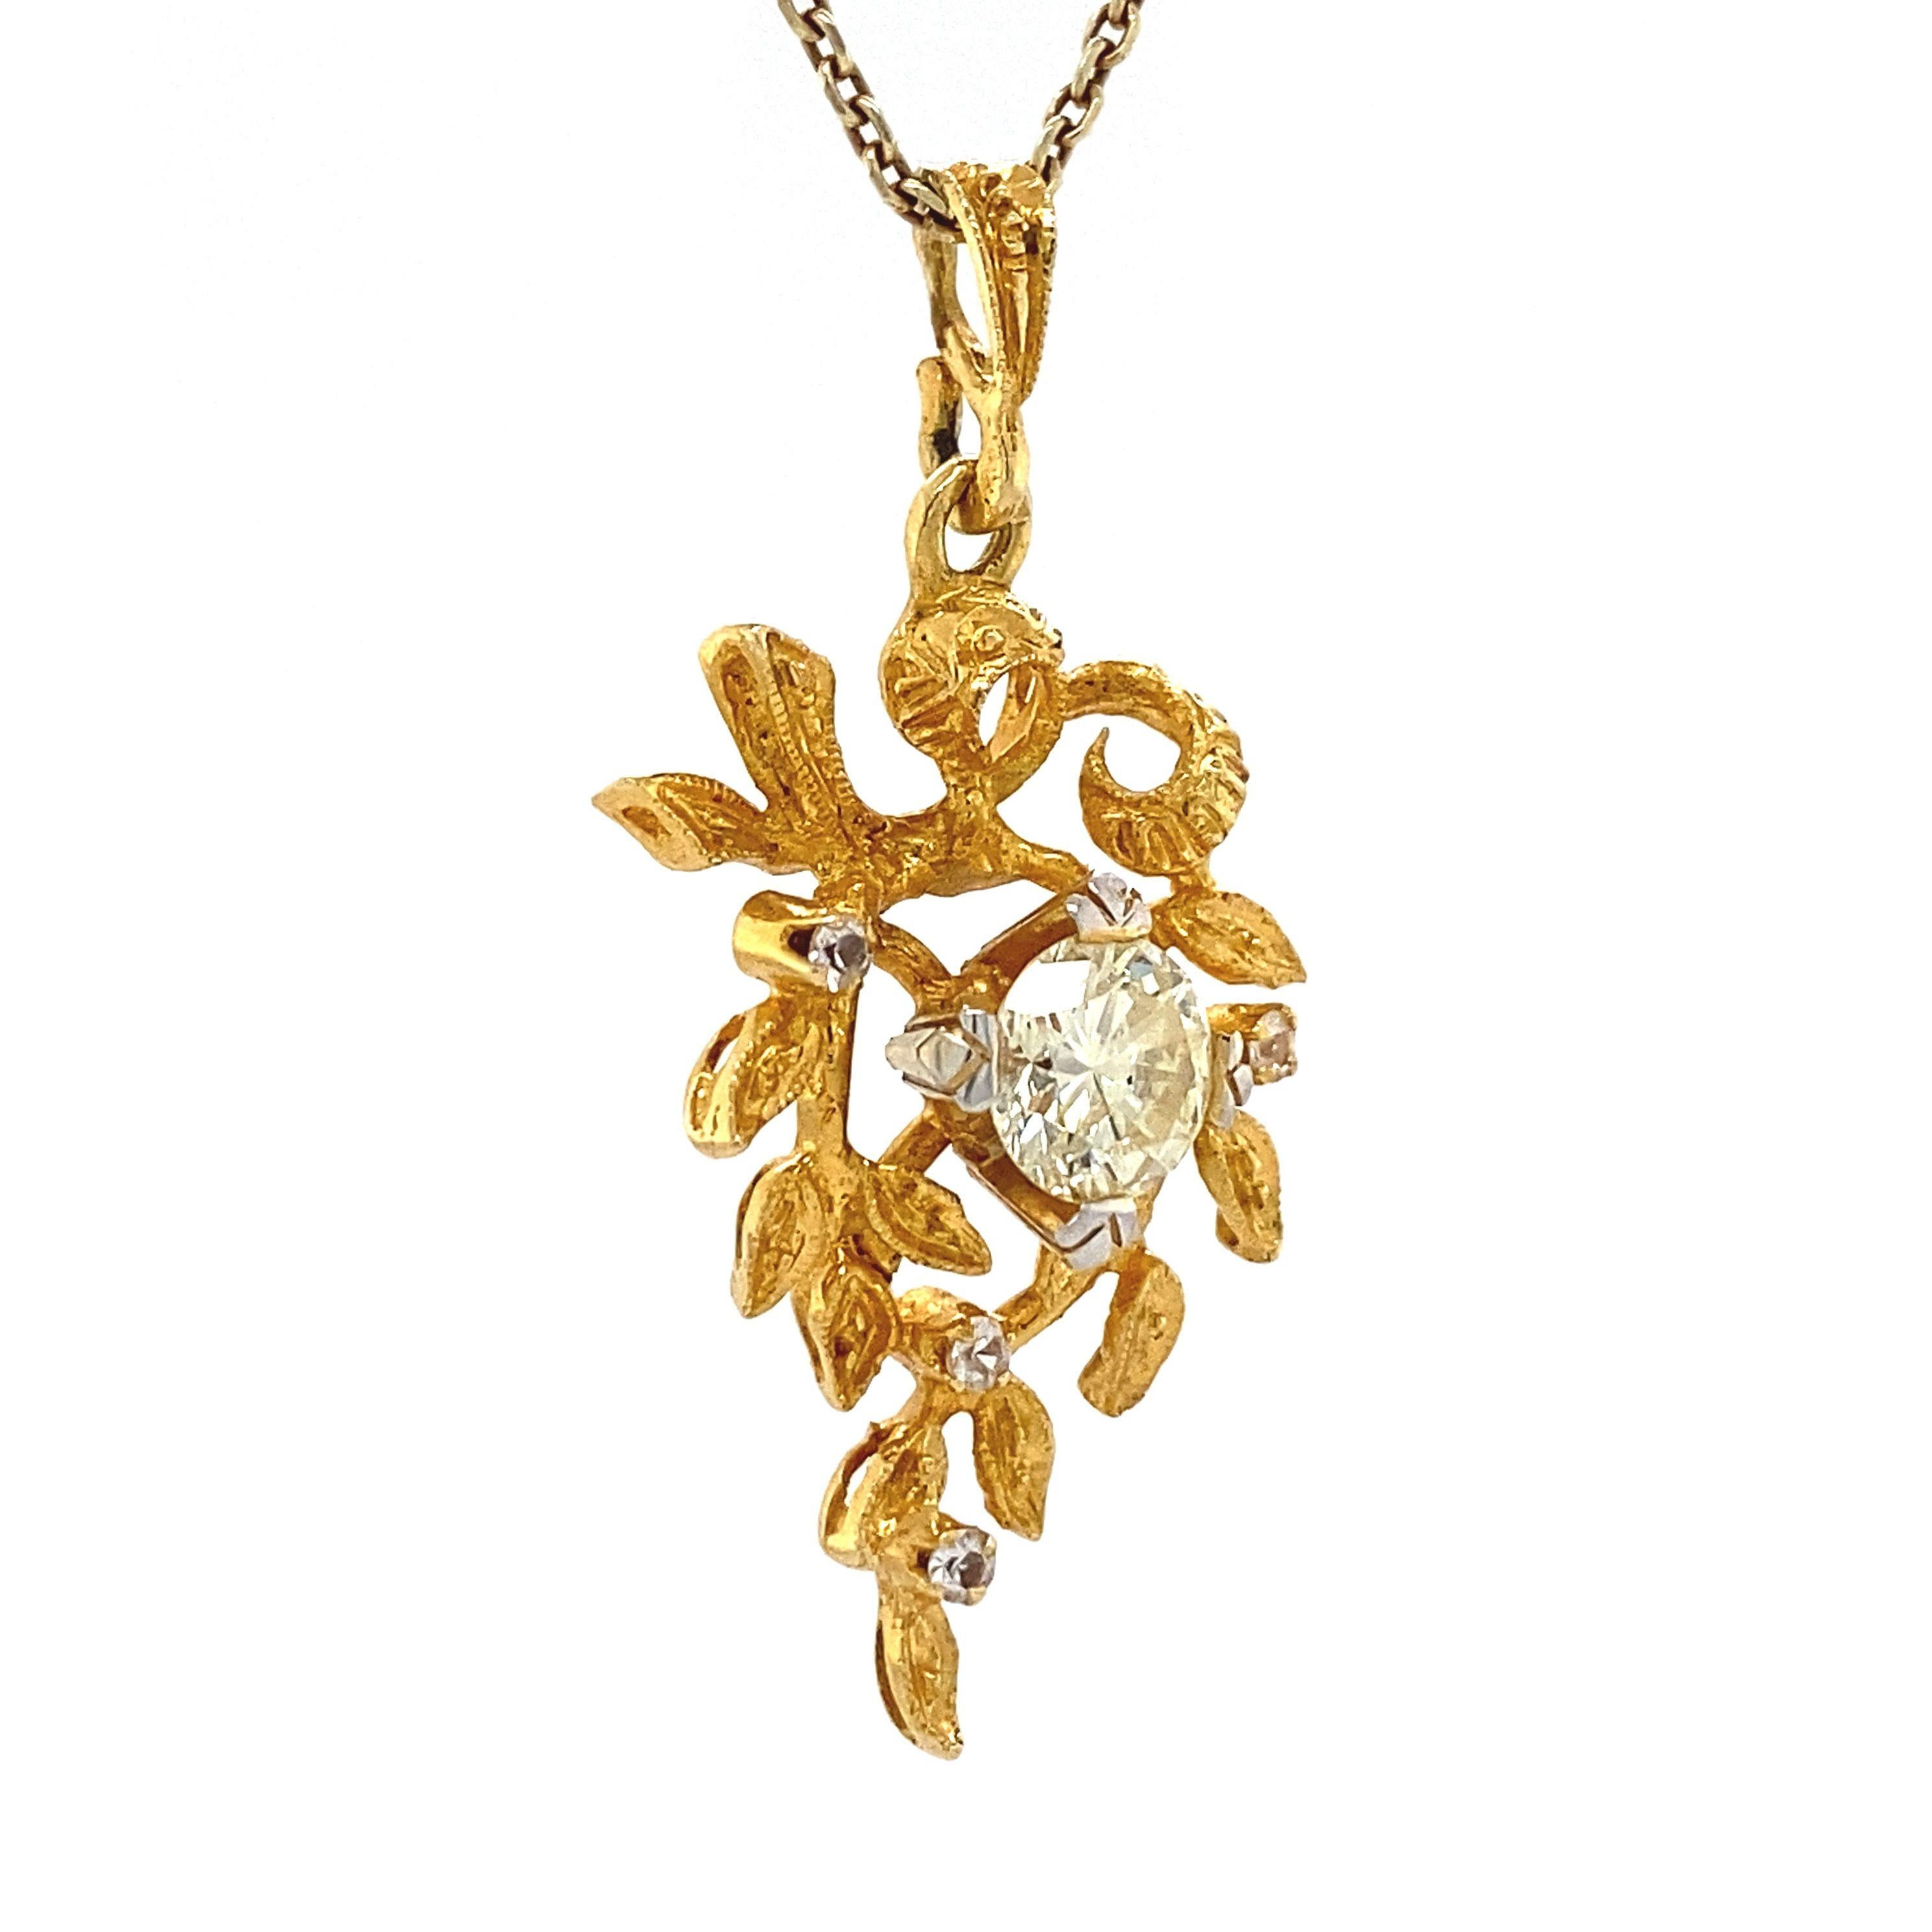 This 18 carat yellow gold pendant has a 0.83 ct. brilliant cut diamond set in a chaton setting. <

Material: Yellow gold
Grade: 18 carat
Stone type: Diamond 1 x 0.83 ct. and 4 x 0.02 ct. brilliantly cut
Width: 16.2 mm
Weight: 3.7 grams
Length